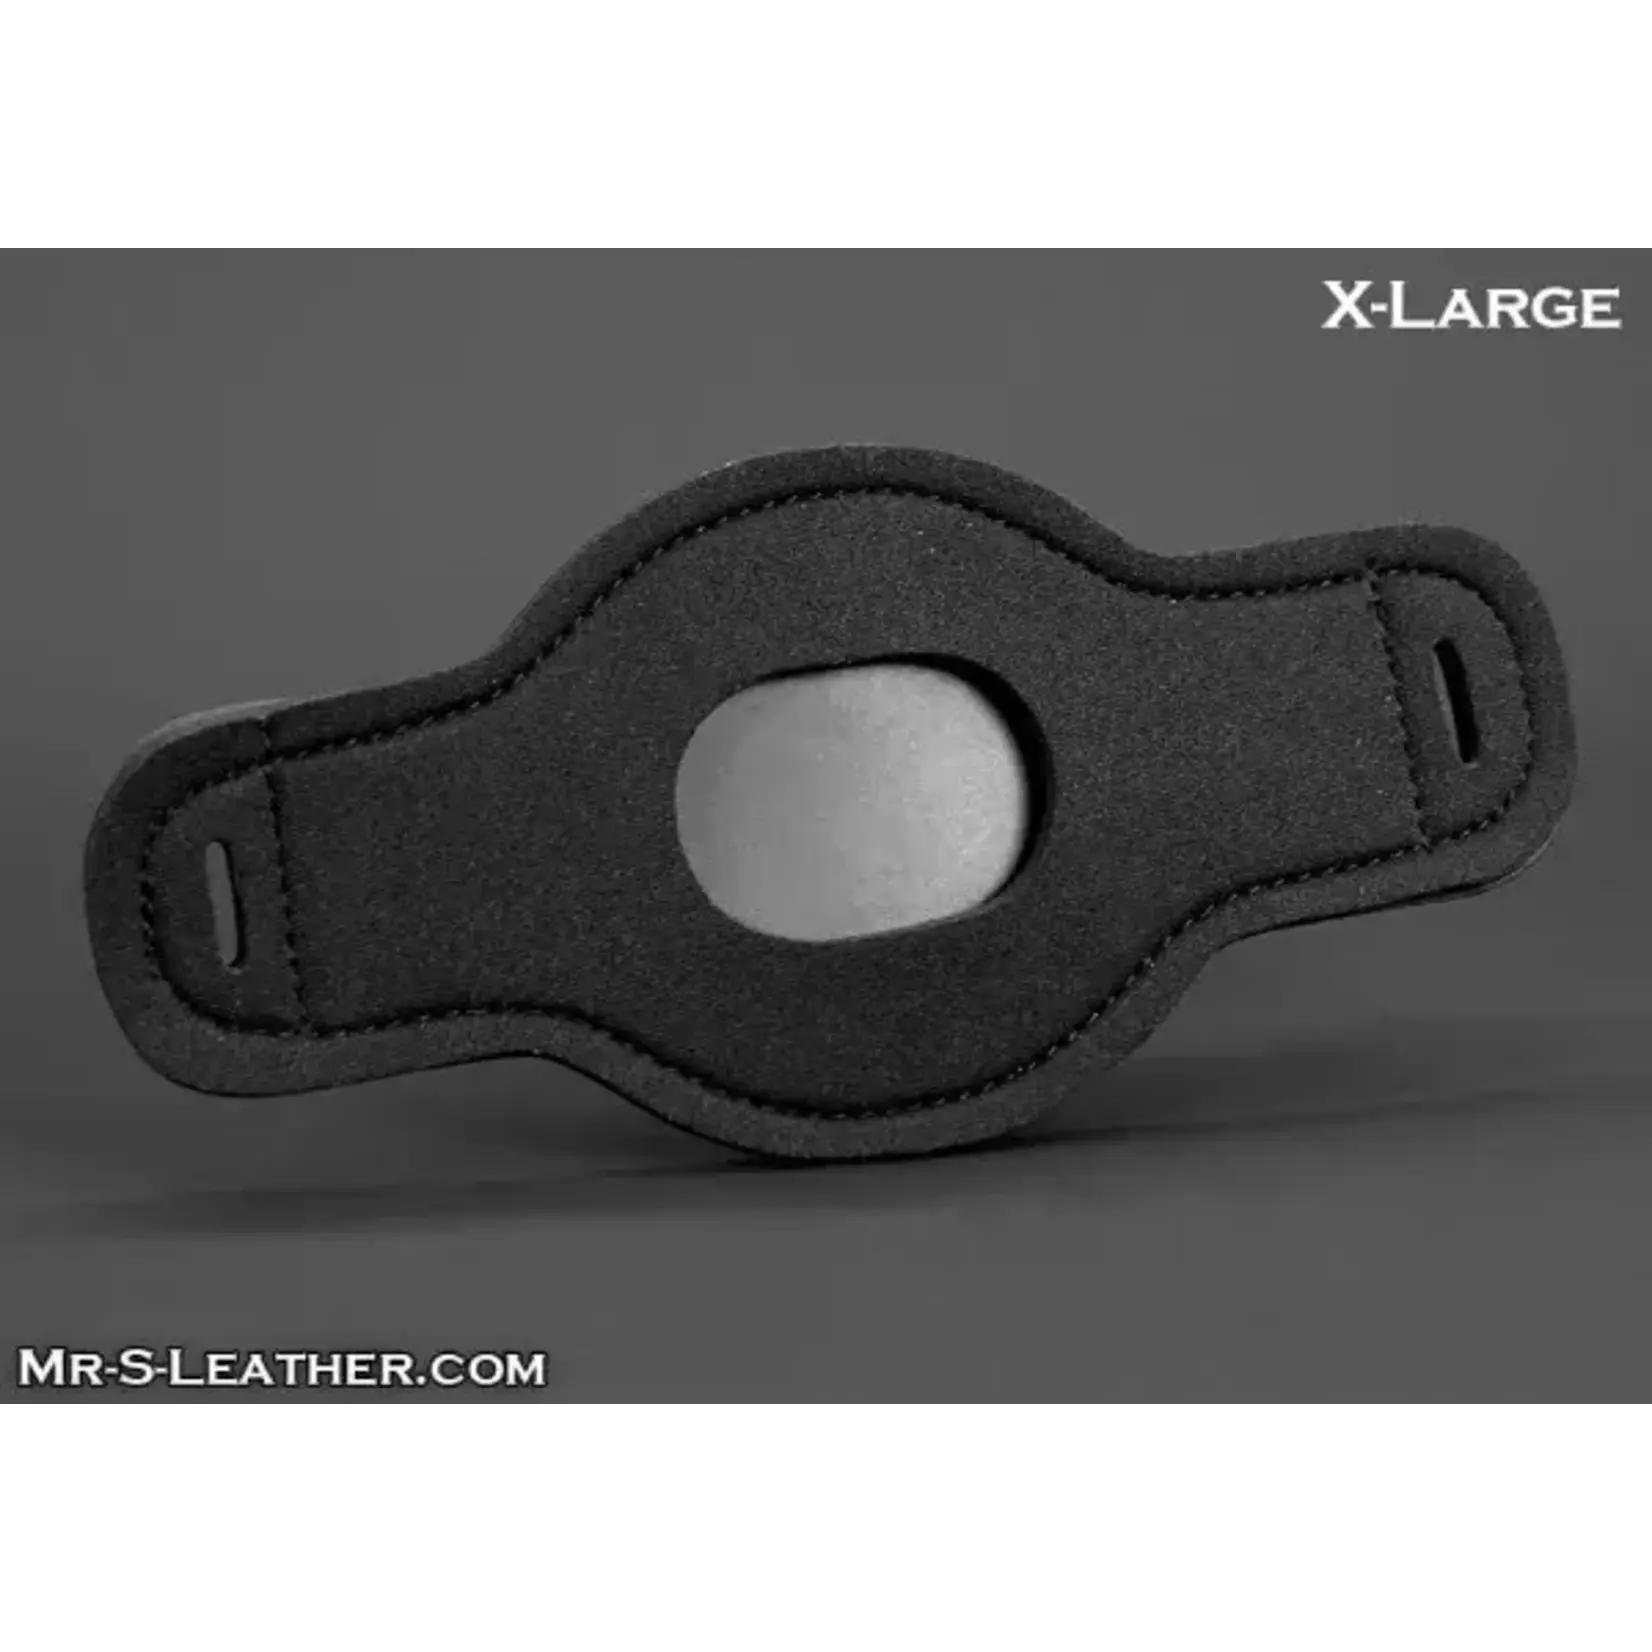 Mr. S Leather Mr. S Leather - Butt Plug Base Plate for Harness